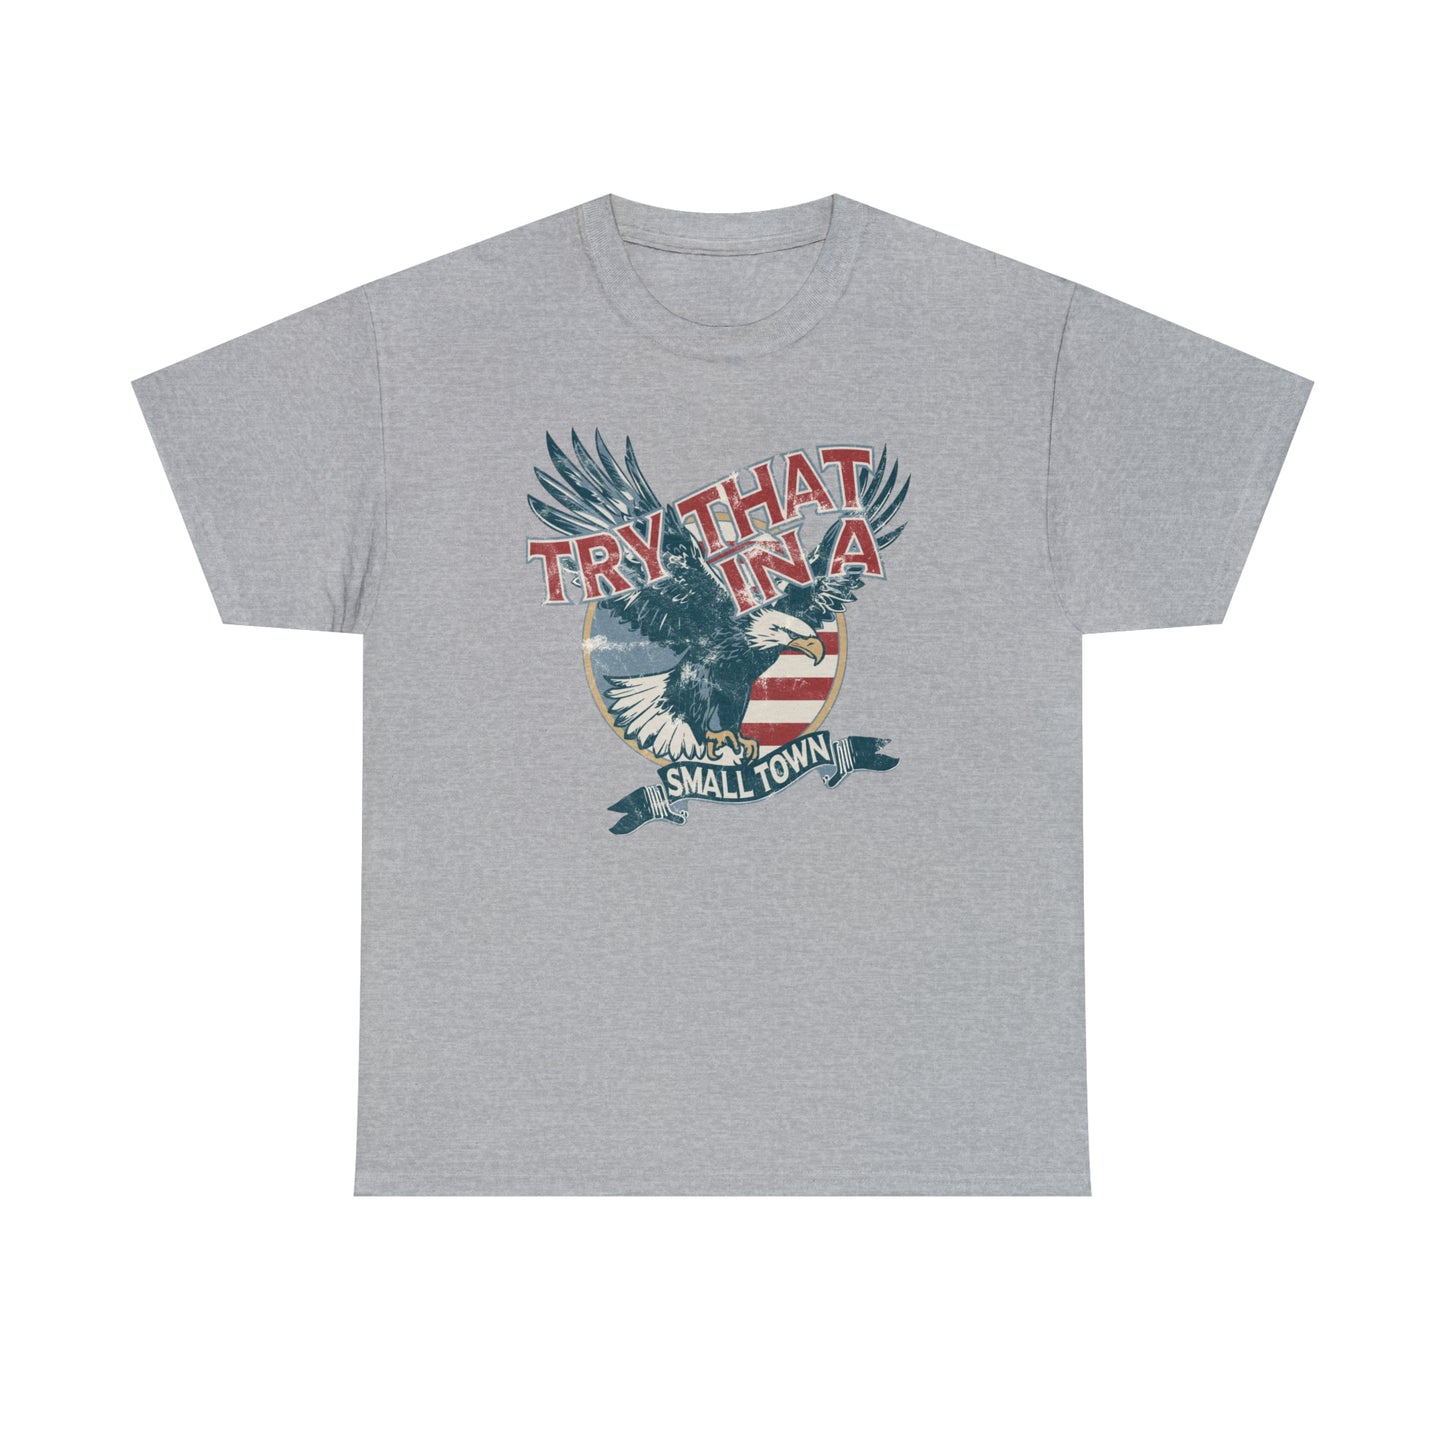 Try that in a small town Eagle Unisex Heavy Cotton Tee - Sport Grey / S - Sport Grey / M - Sport Grey / L - Sport Grey / XL - Sport Grey / 2XL - Sport Grey / 3XL - Sport Grey / 4XL - Sport Grey / 5XL